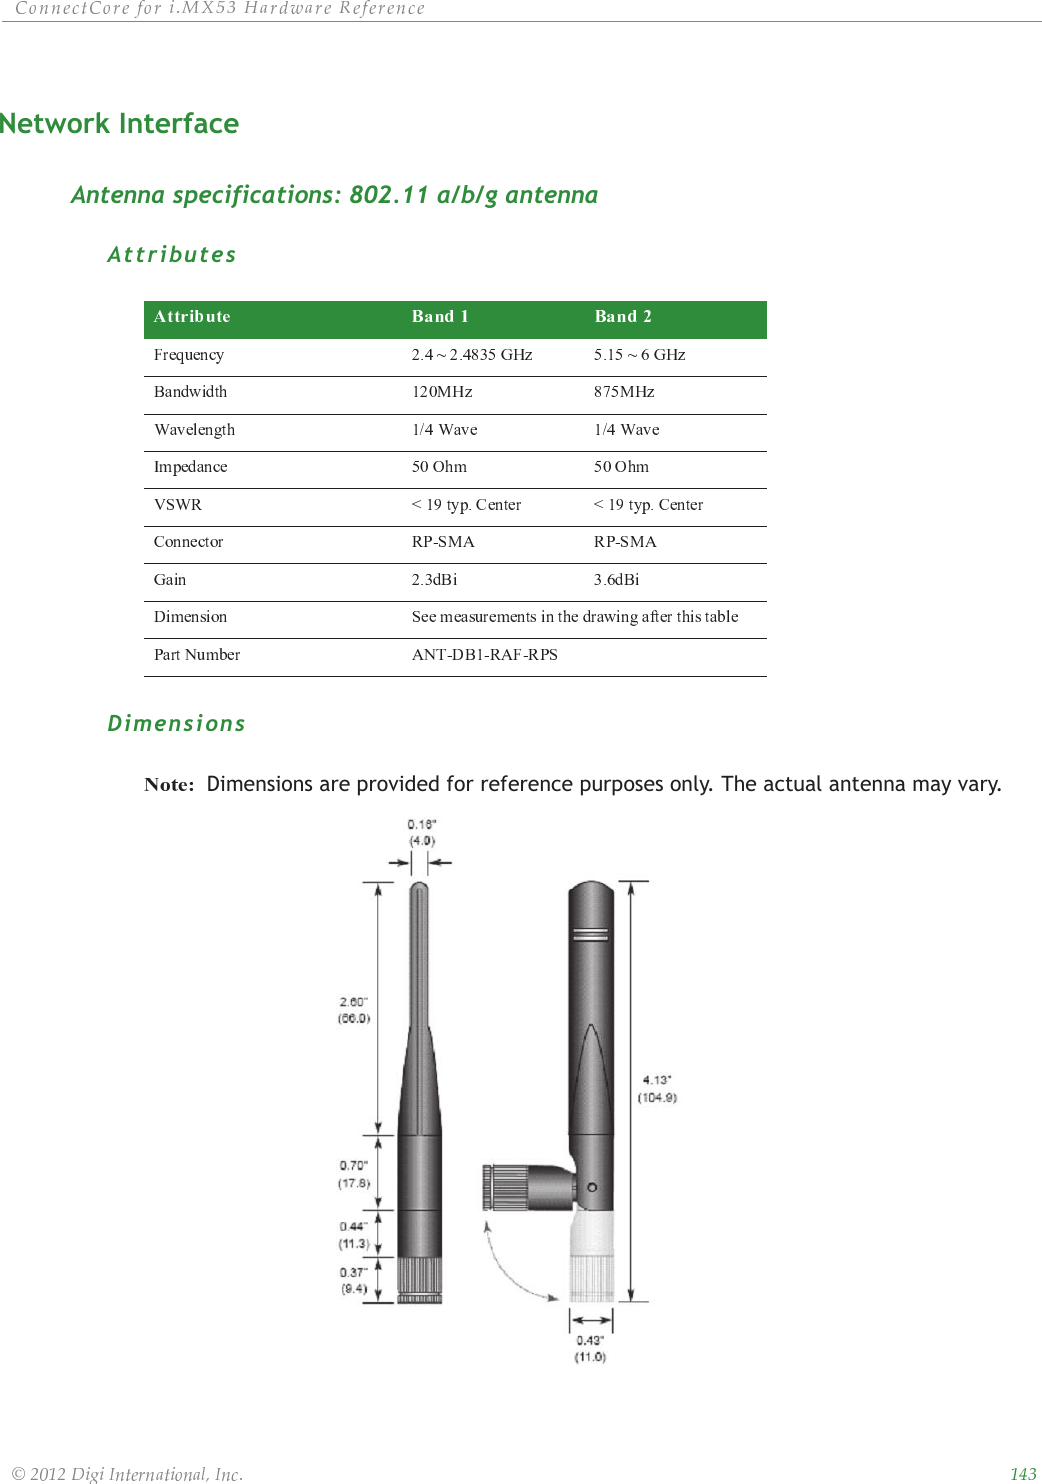 ȱ ȱ ȱ ȱ ȱ ȱȱ ȱ ȱ ȱ ȱȱȱNetwork Interface Antenna specifications: 802.11 a/b/g antennaAttributesDimensions Dimensions are provided for reference purposes only. The actual antenna may vary.